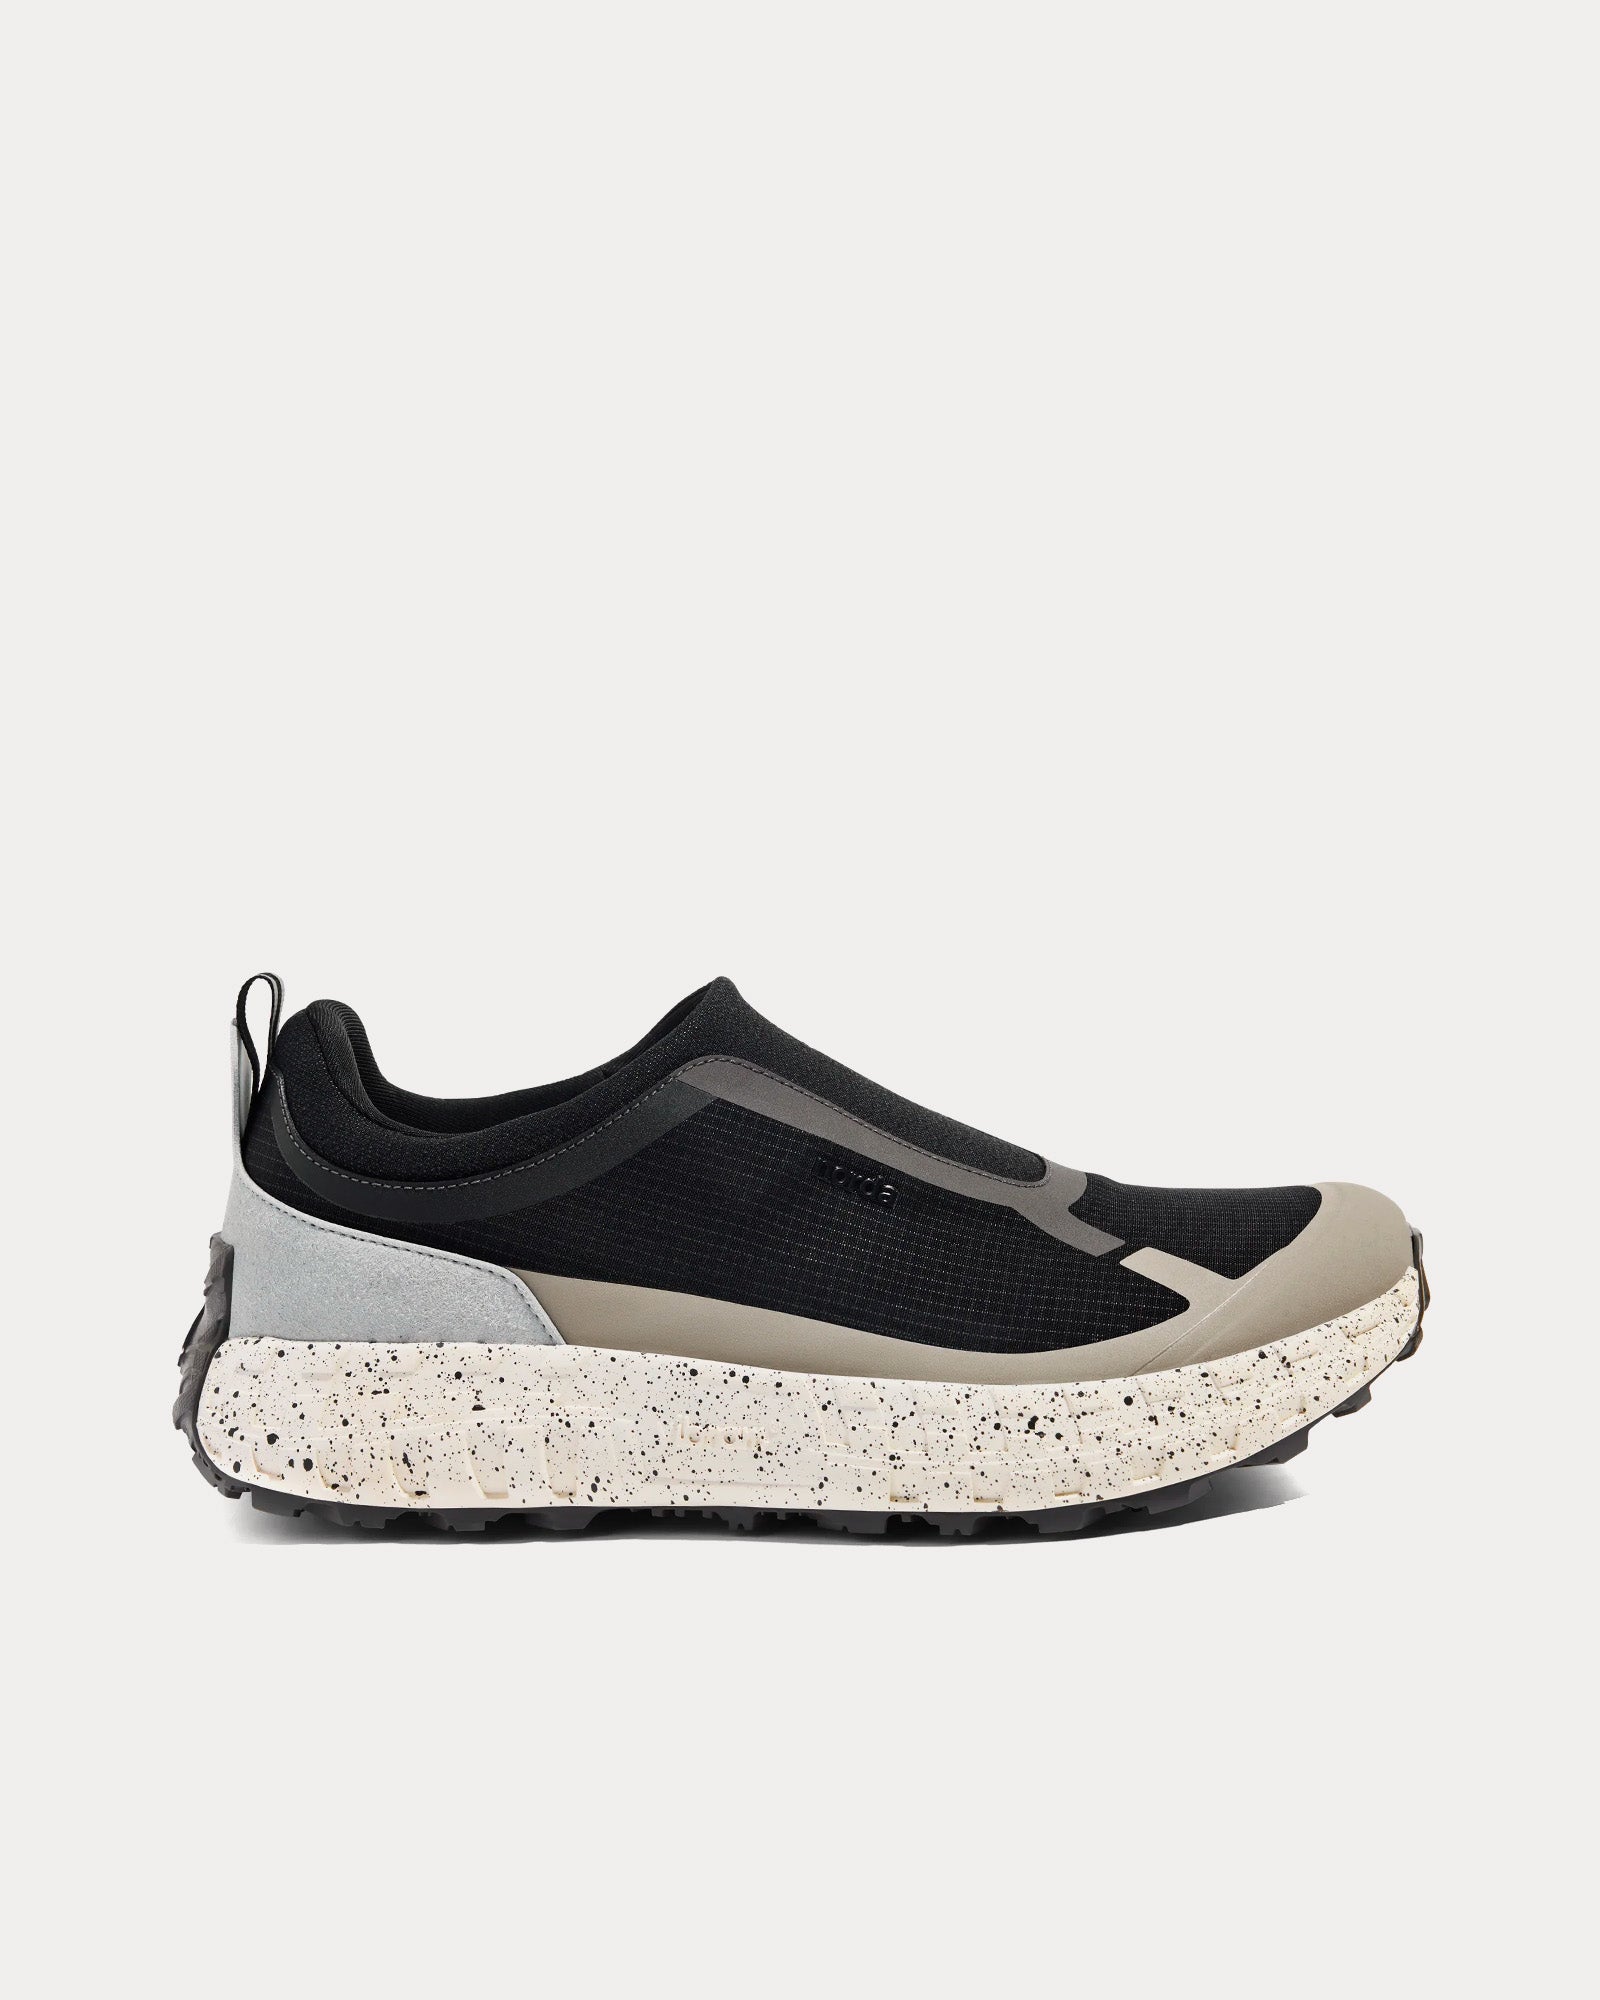 Norda x Haven - 003 W Quarry Running Shoes